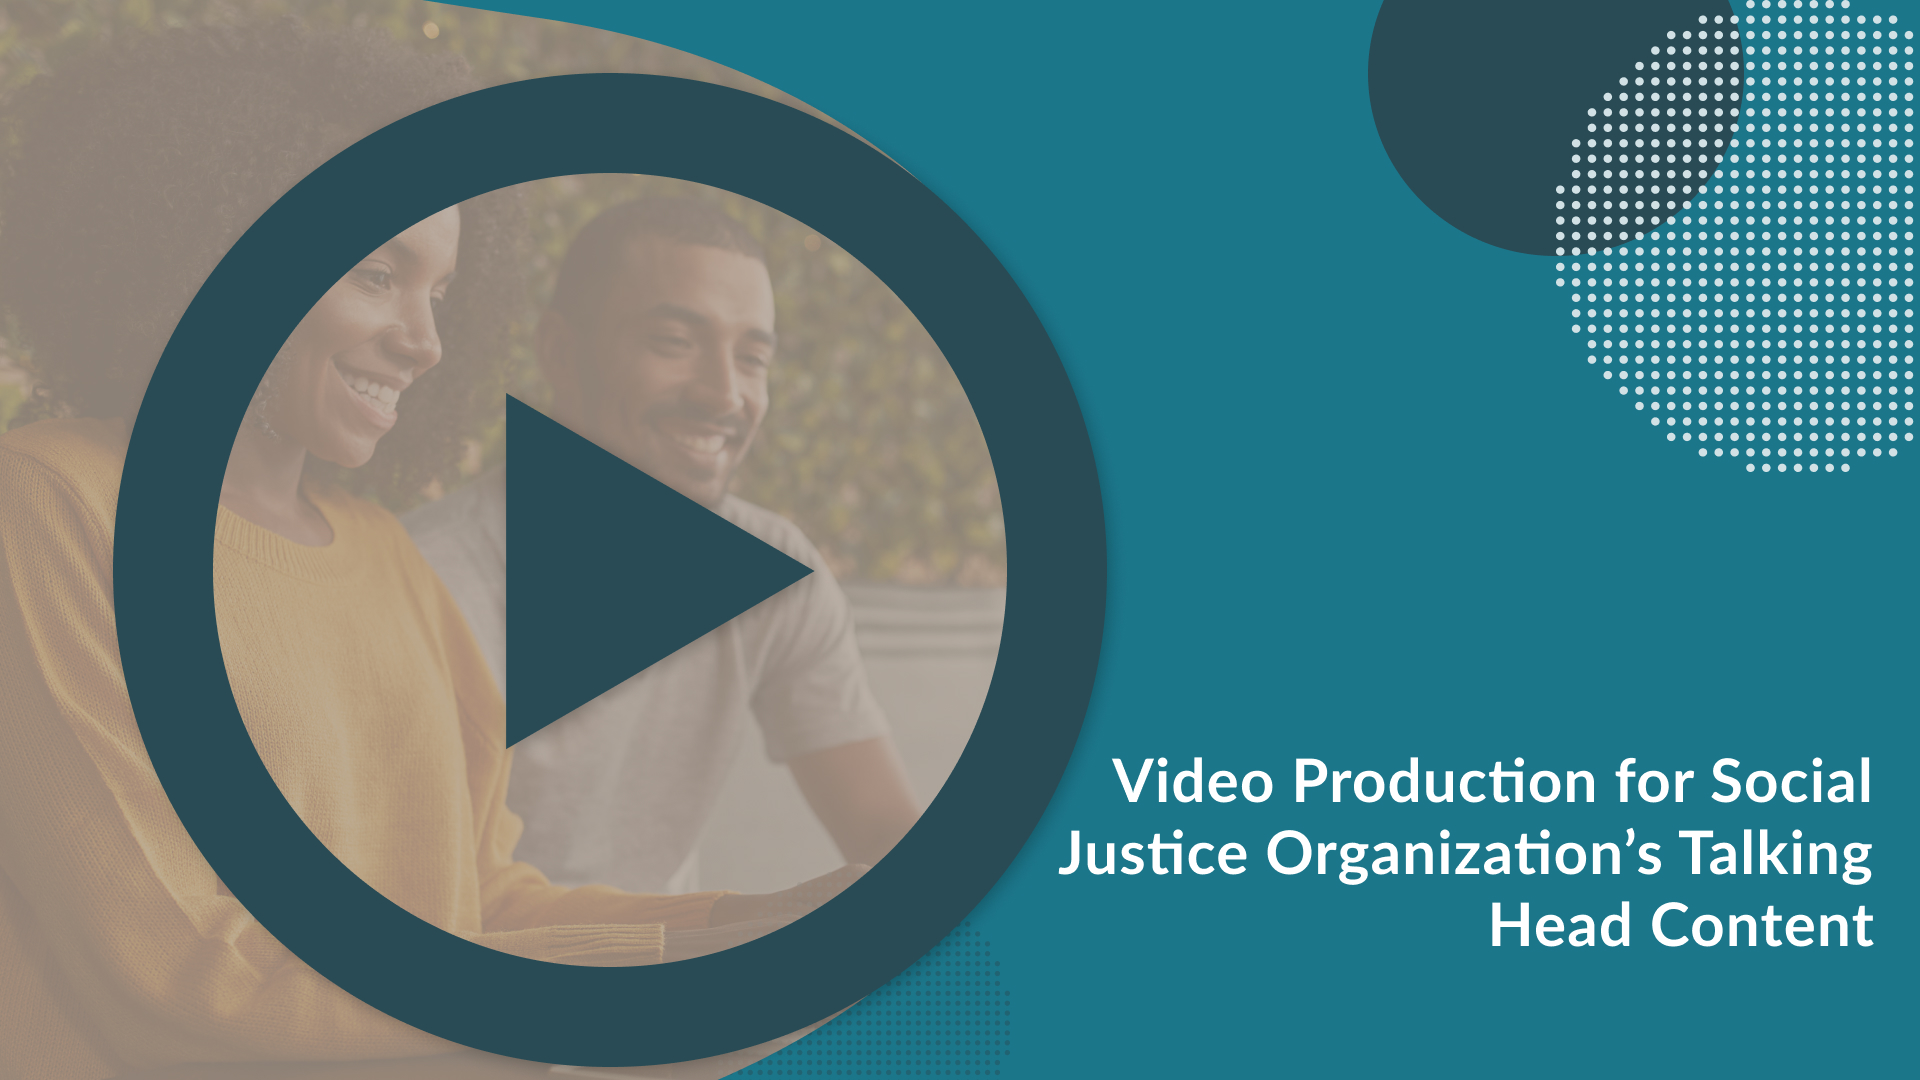 Image Overlay. The text reads "Video Production for Social Justice Organization’s Talking Head Content"